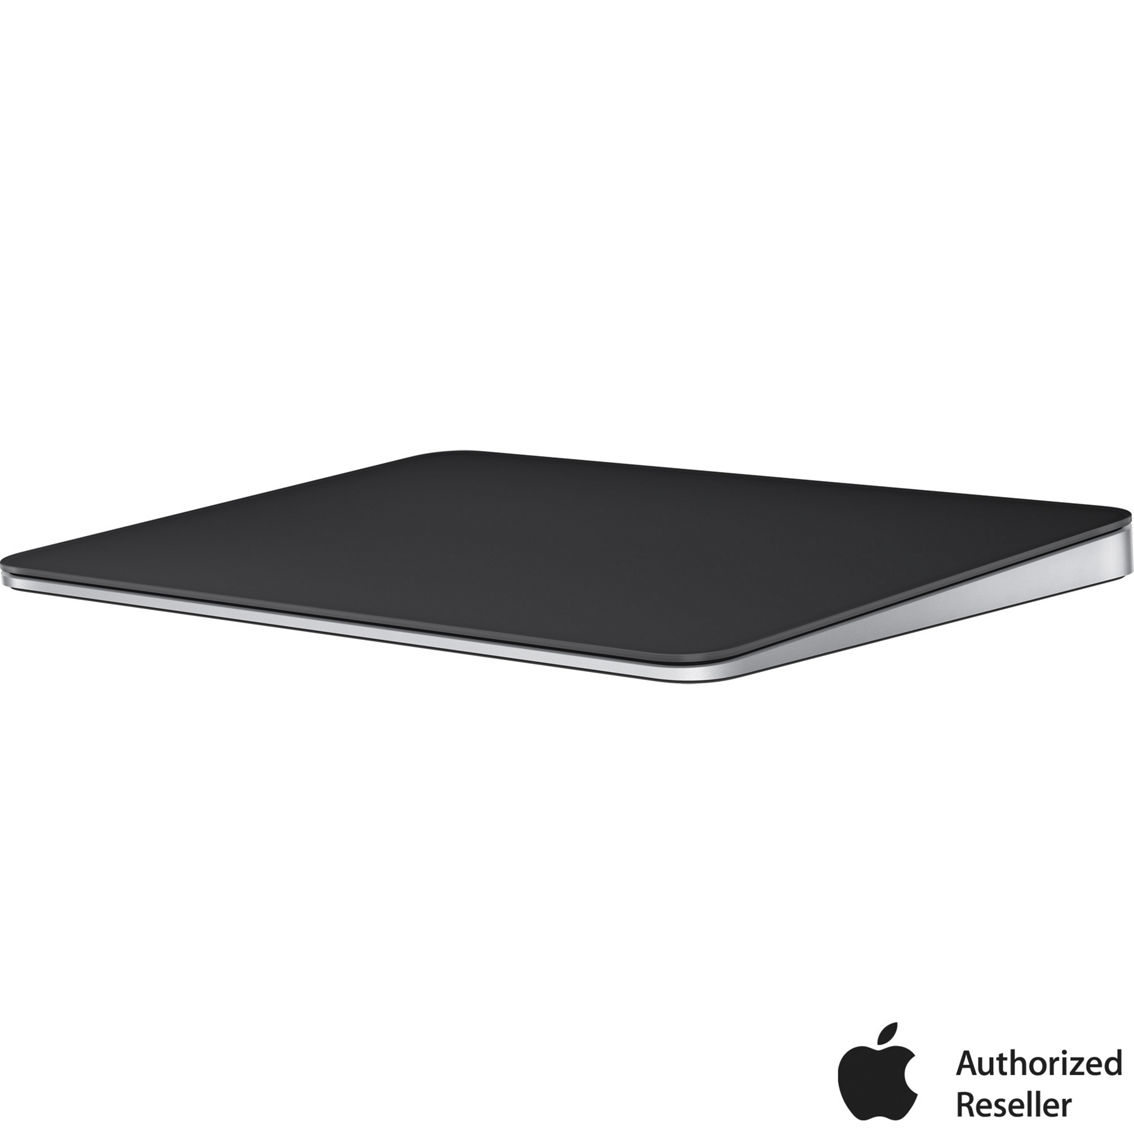 Apple Magic Trackpad Black Multi-Touch Surface - Image 2 of 3